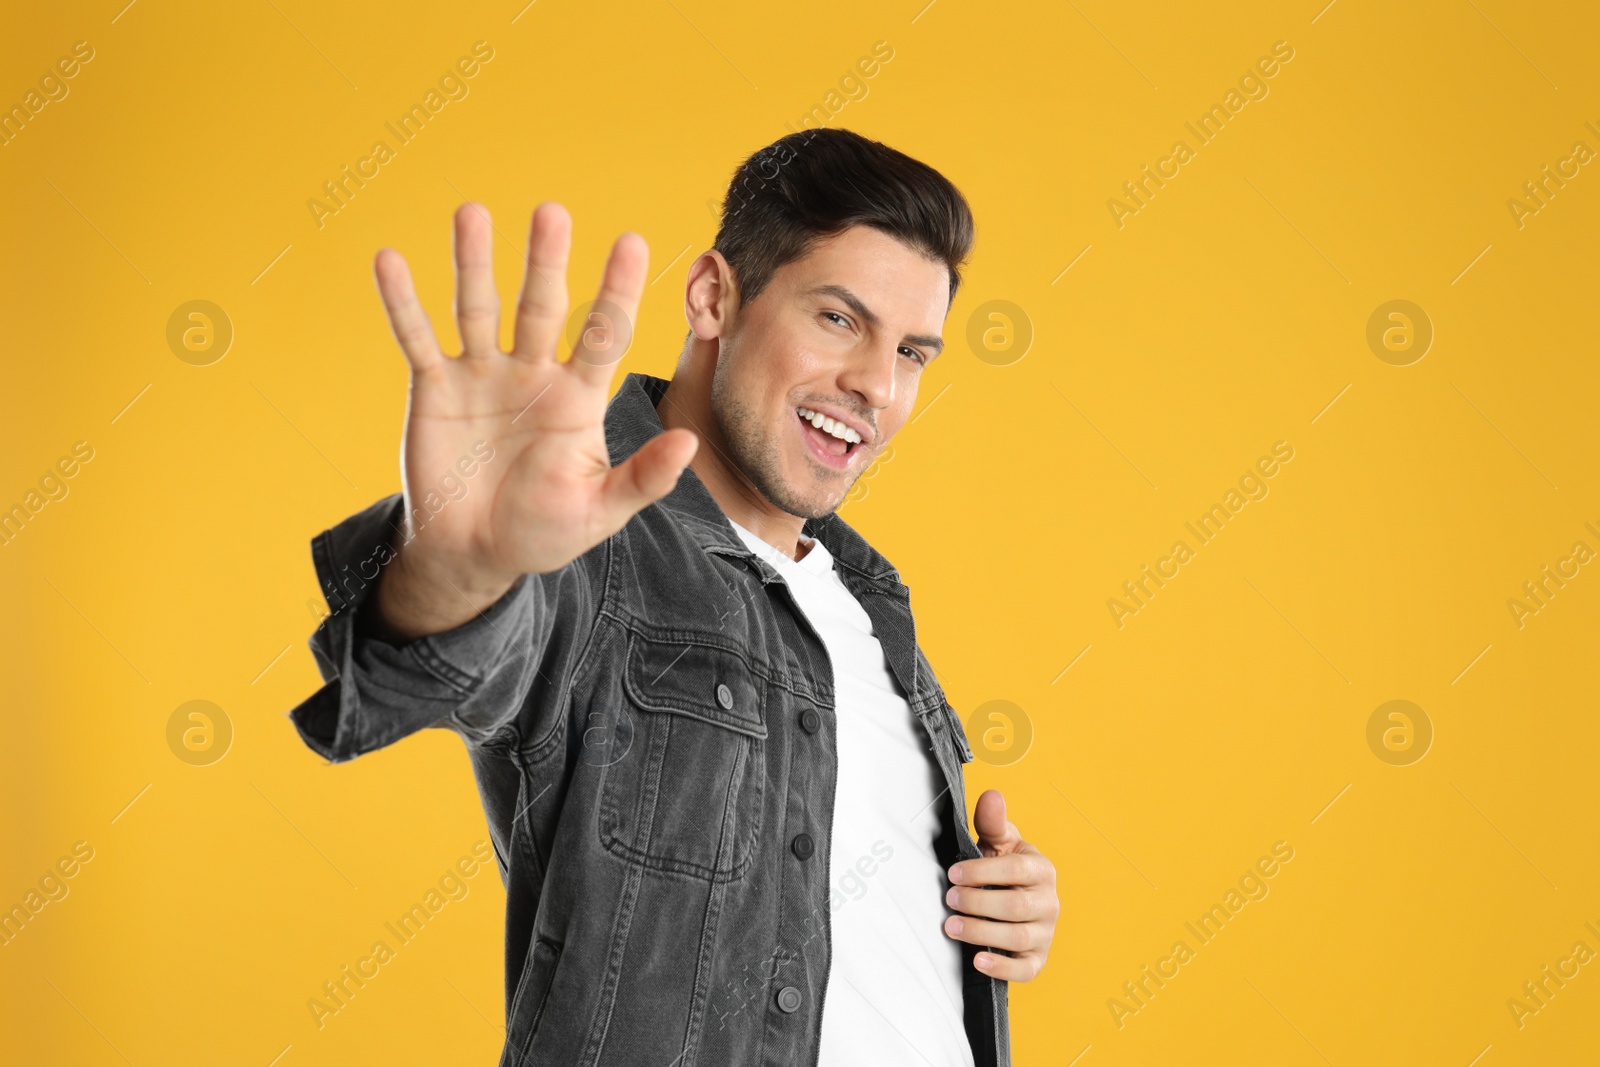 Photo of Man showing number five with his hand on yellow background